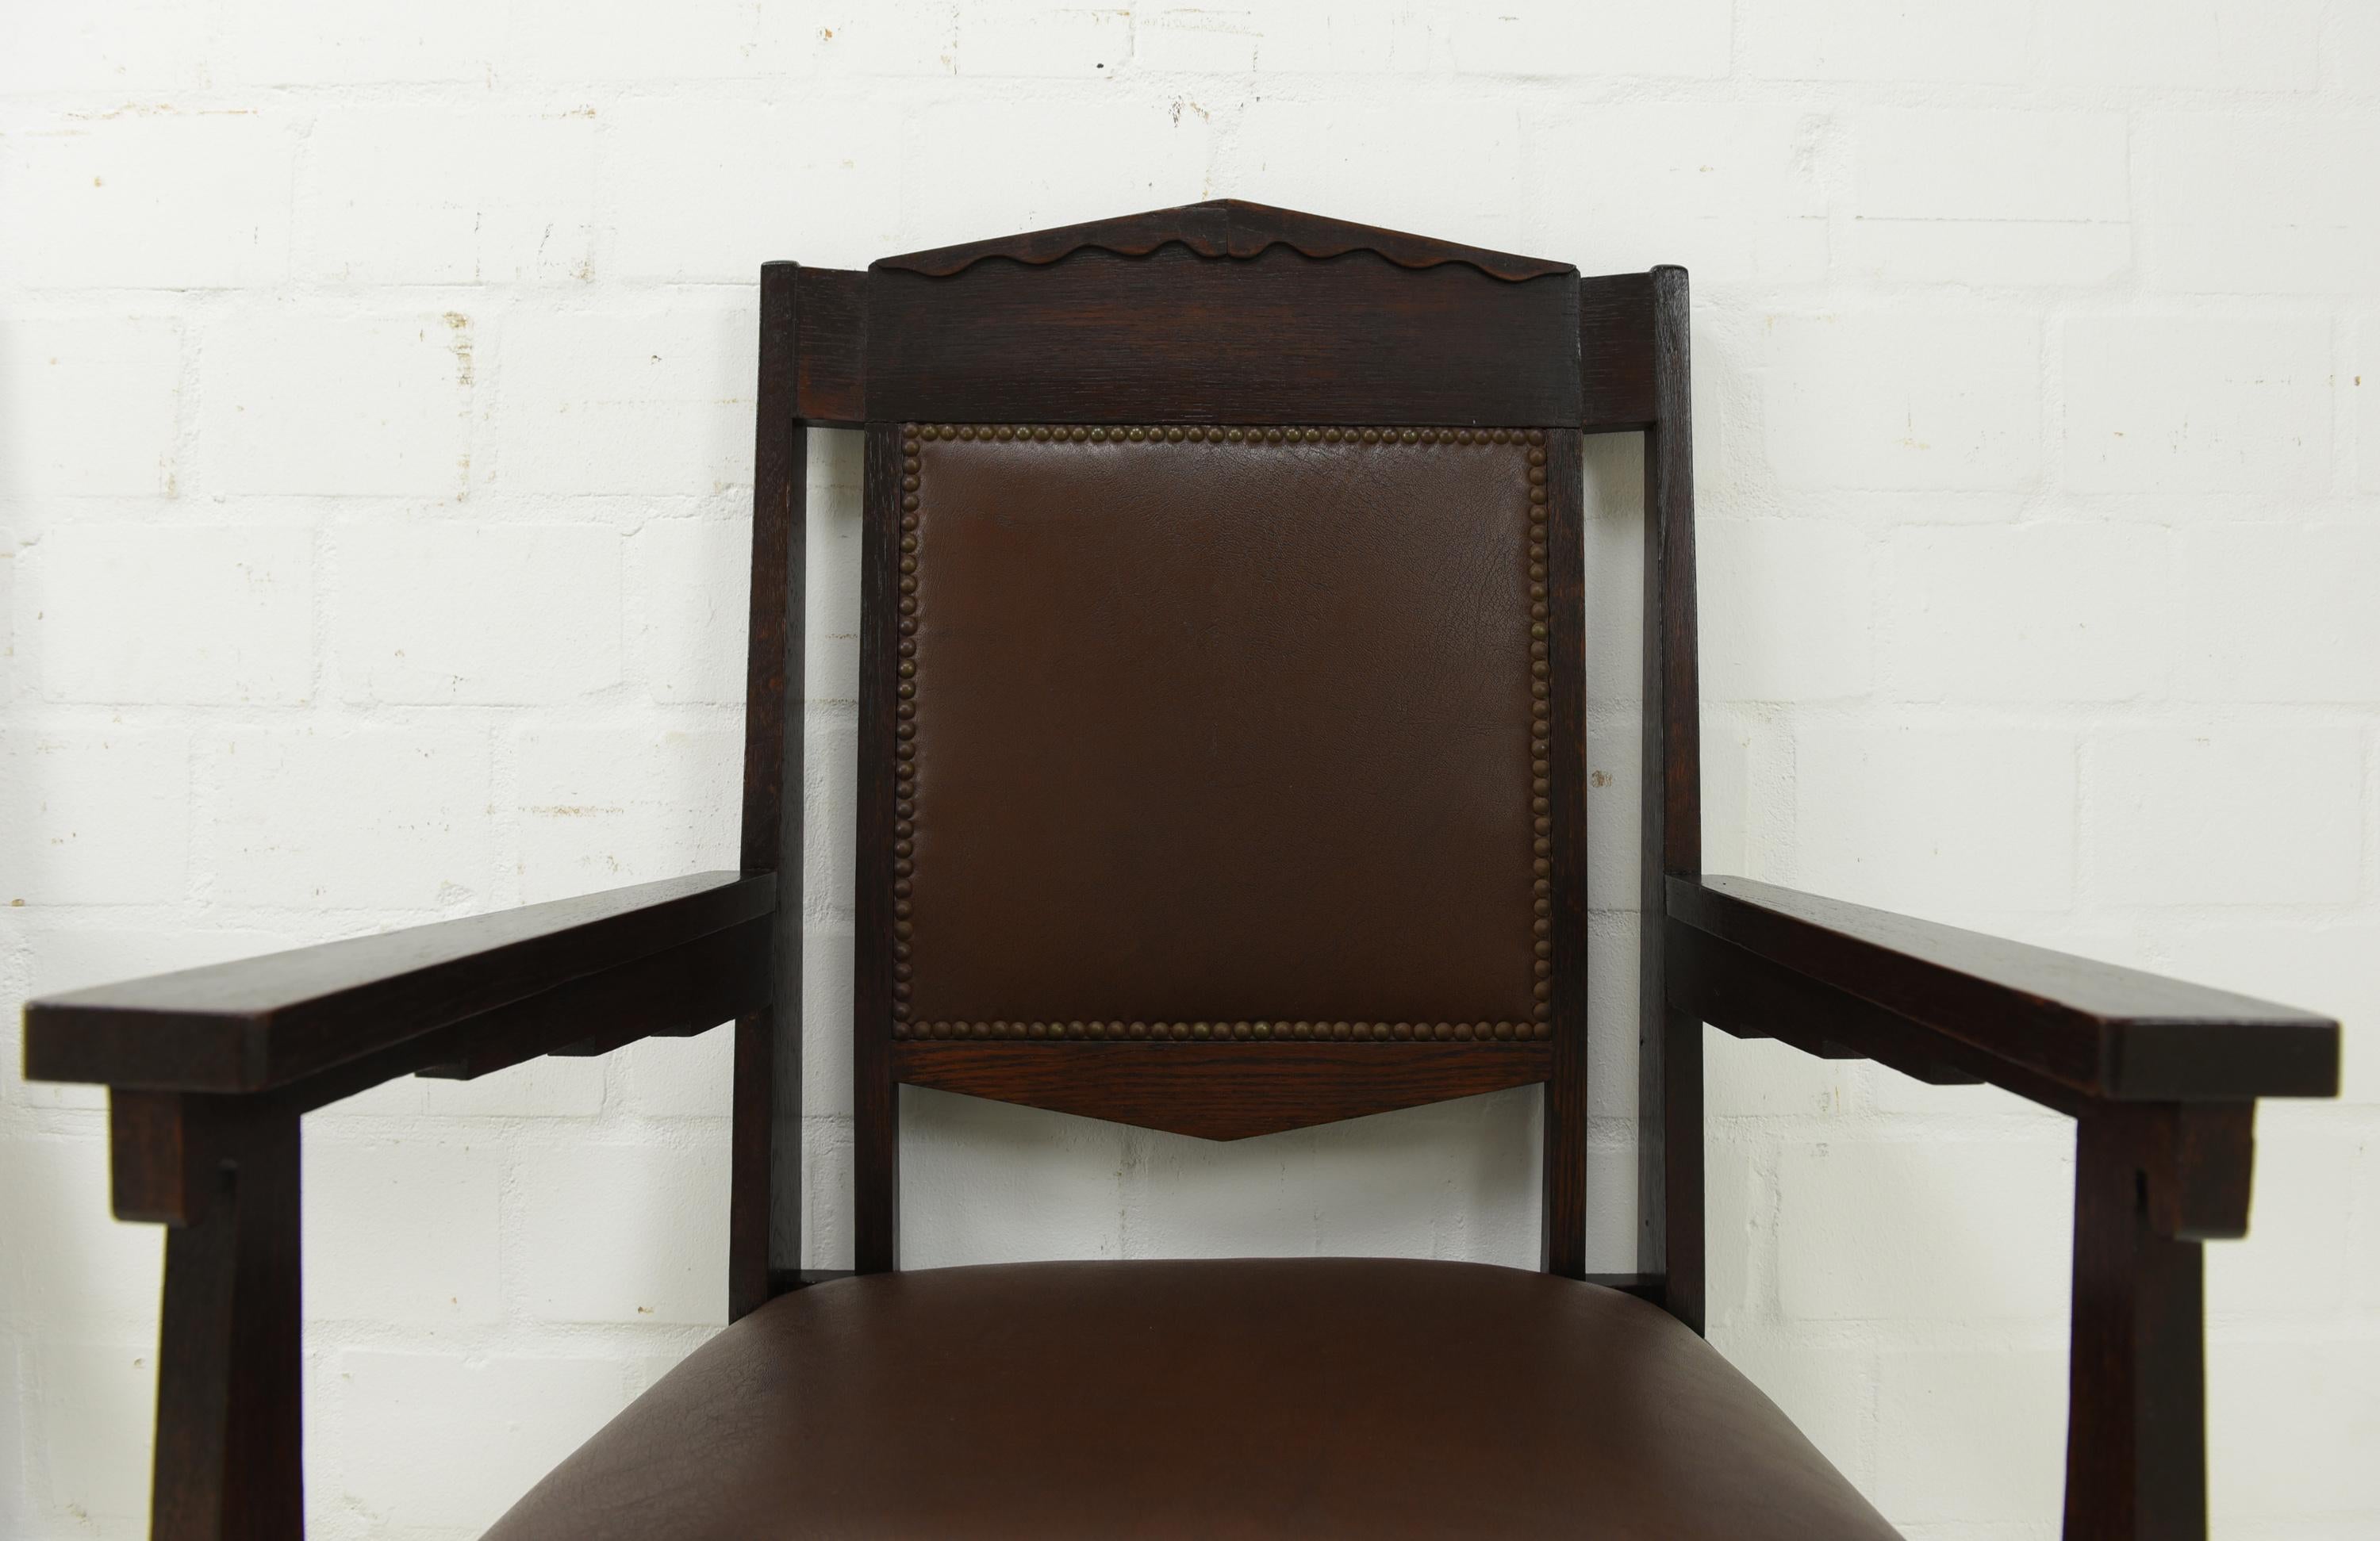 Pair of Art Deco Armchair Desk Chairs in Solid Oak, 1925 For Sale 2